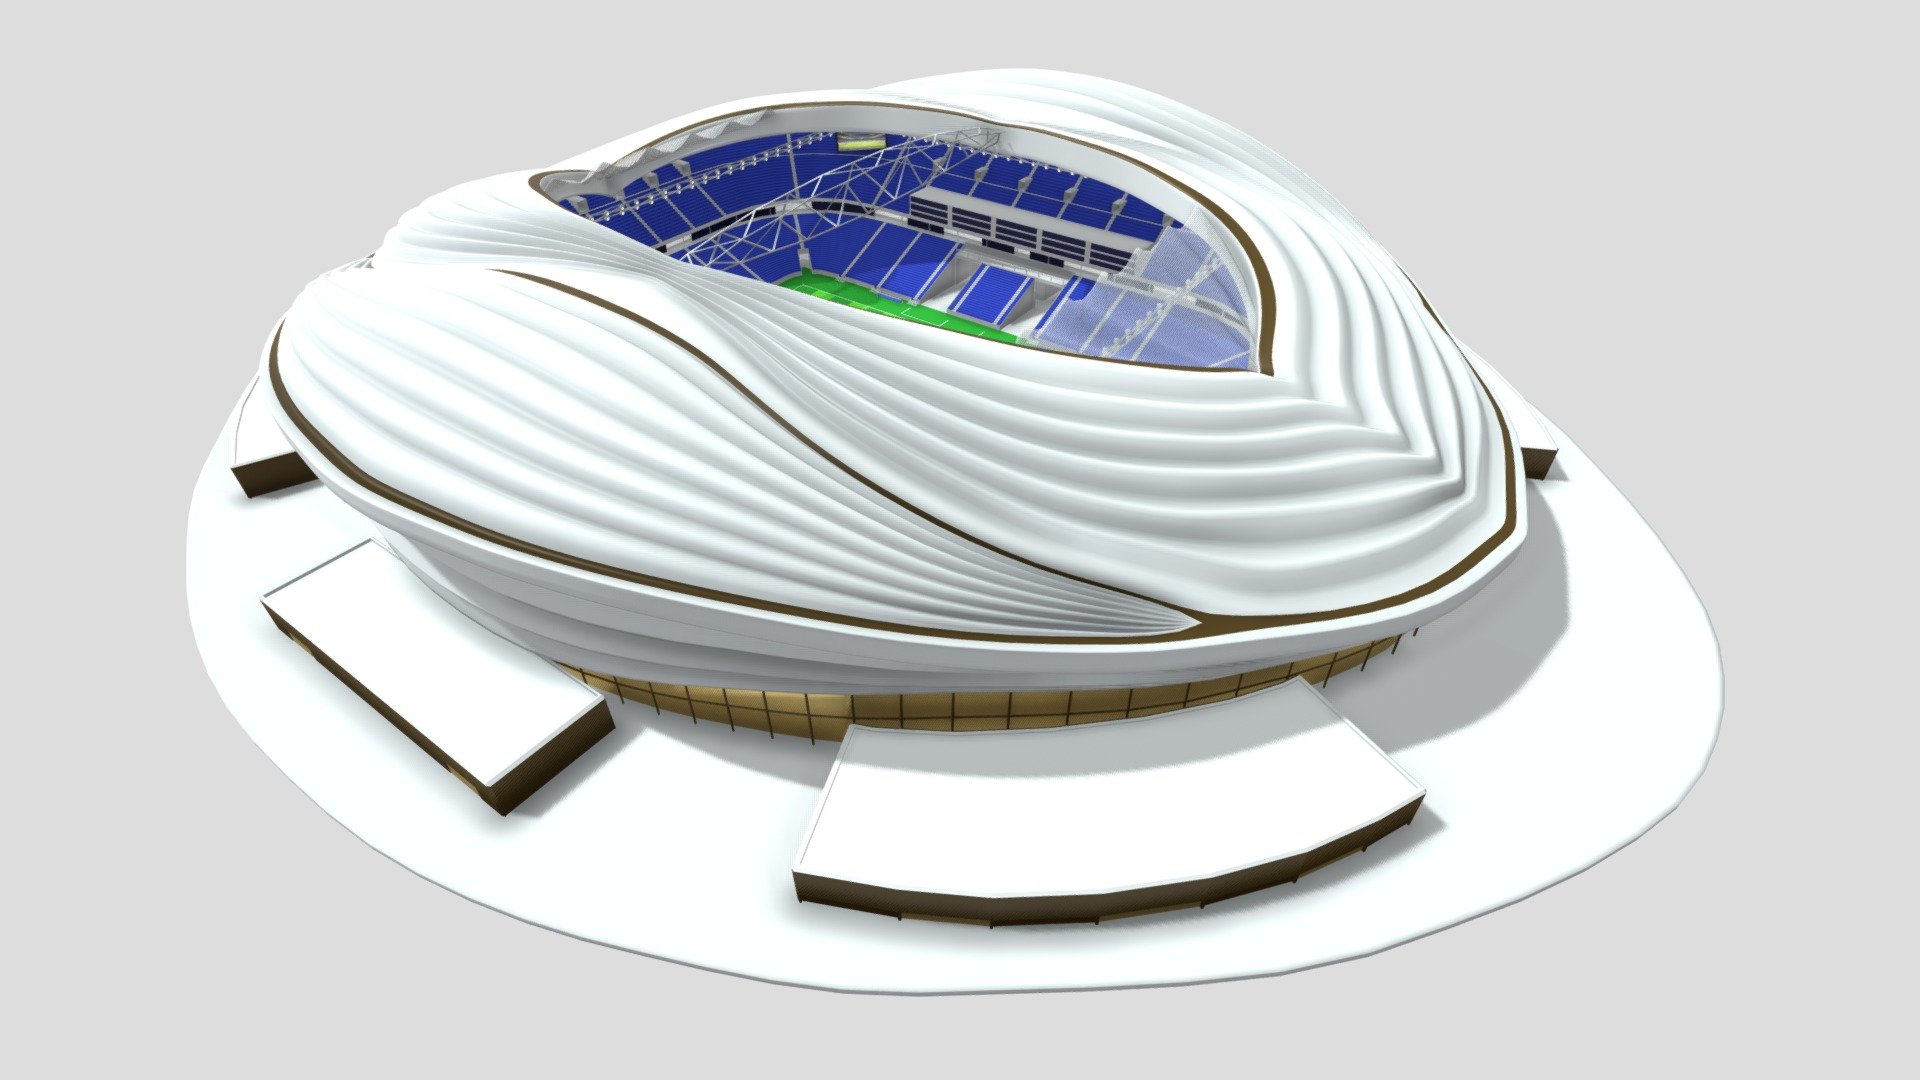 Al Janoub Stadium is a multi-purpose stadium located in the city of Al Wakrah in Qatar.
Al Janoub one of the stadiums where the 2022 Qatar World Cup matches will be played - Al Janoub Stadium - Buy Royalty Free 3D model by Shin Xiba 3D (@Xiba3D) 3d model